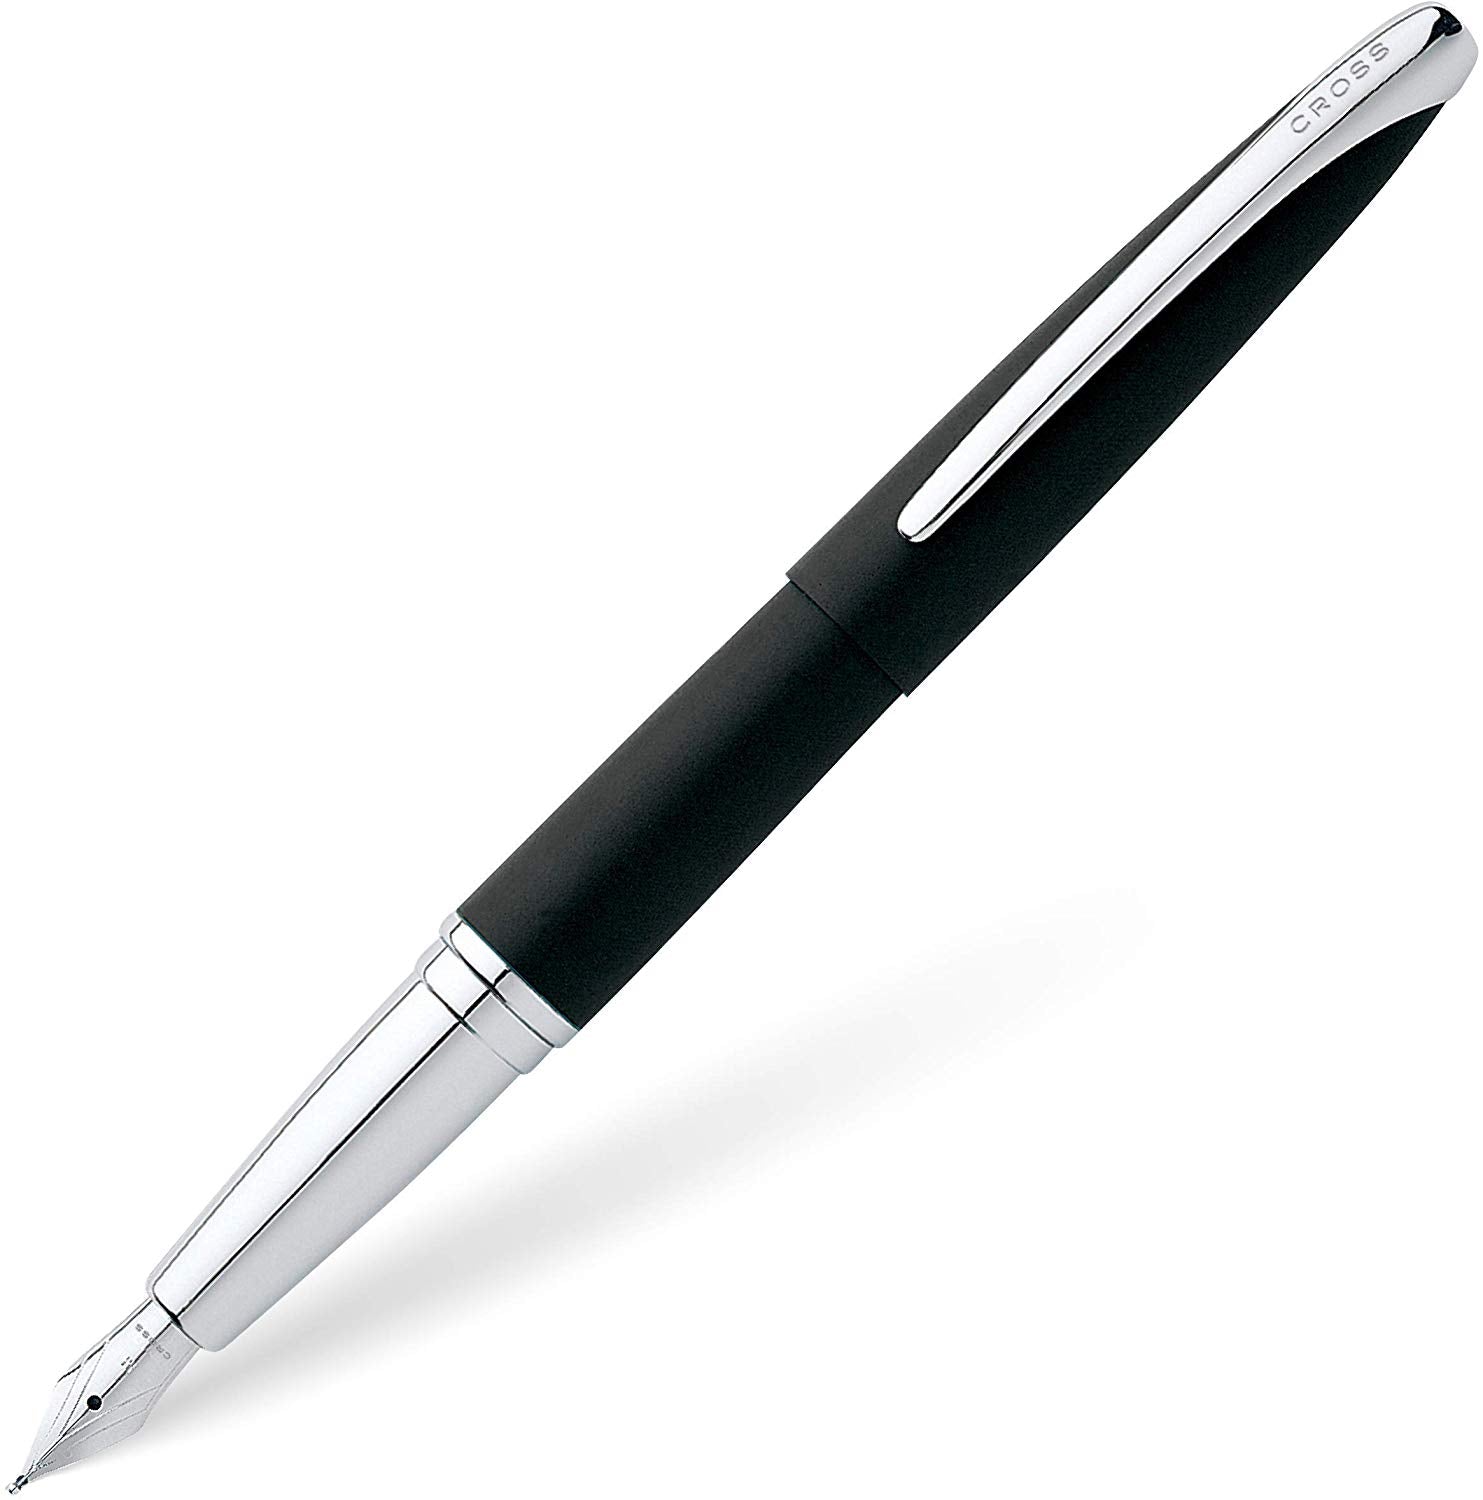 Cross ATX Basalt Black Fountain Pen with Chrome-Plated Appointments and Stainless Steel Fine Nib